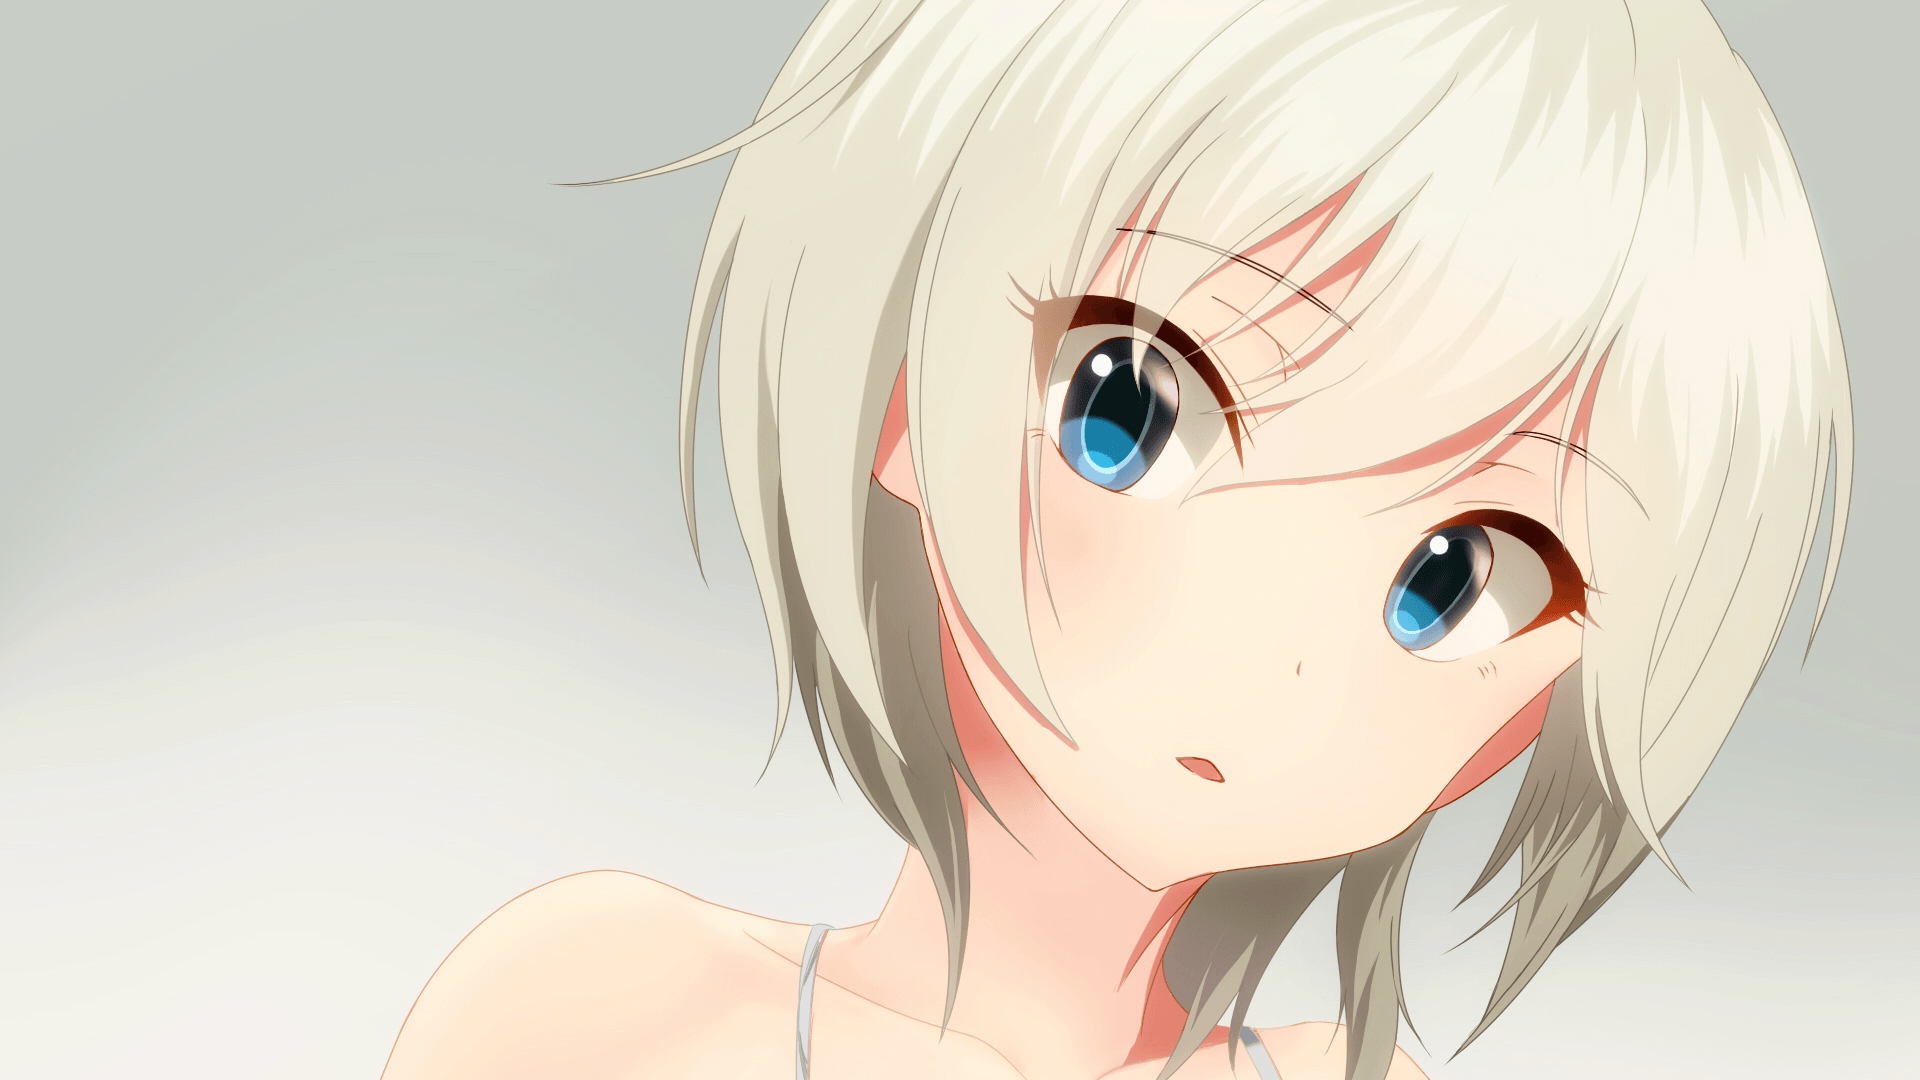 My collection of 1080p Anime Girl Wallpapers